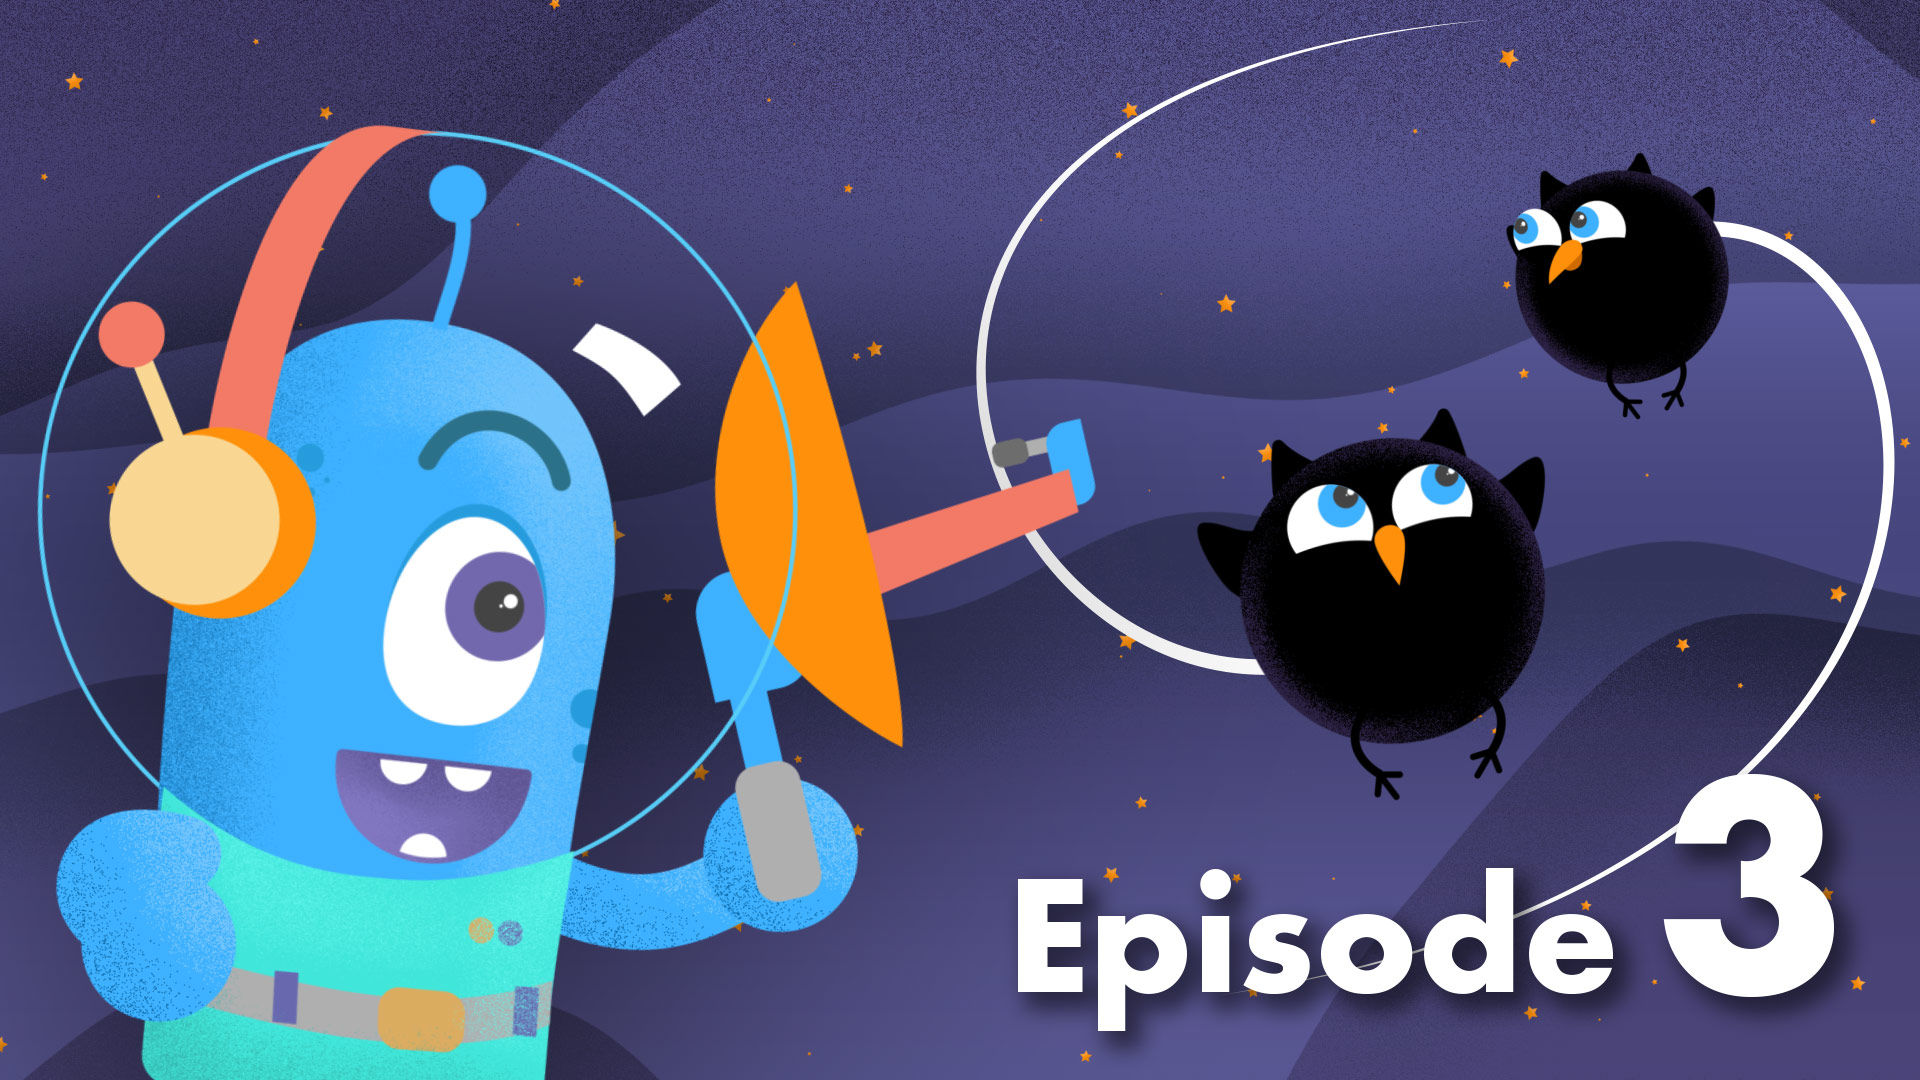 Video thumbnail with a blue cartoon figure holding a listening device toward two black birds that represent black holes.